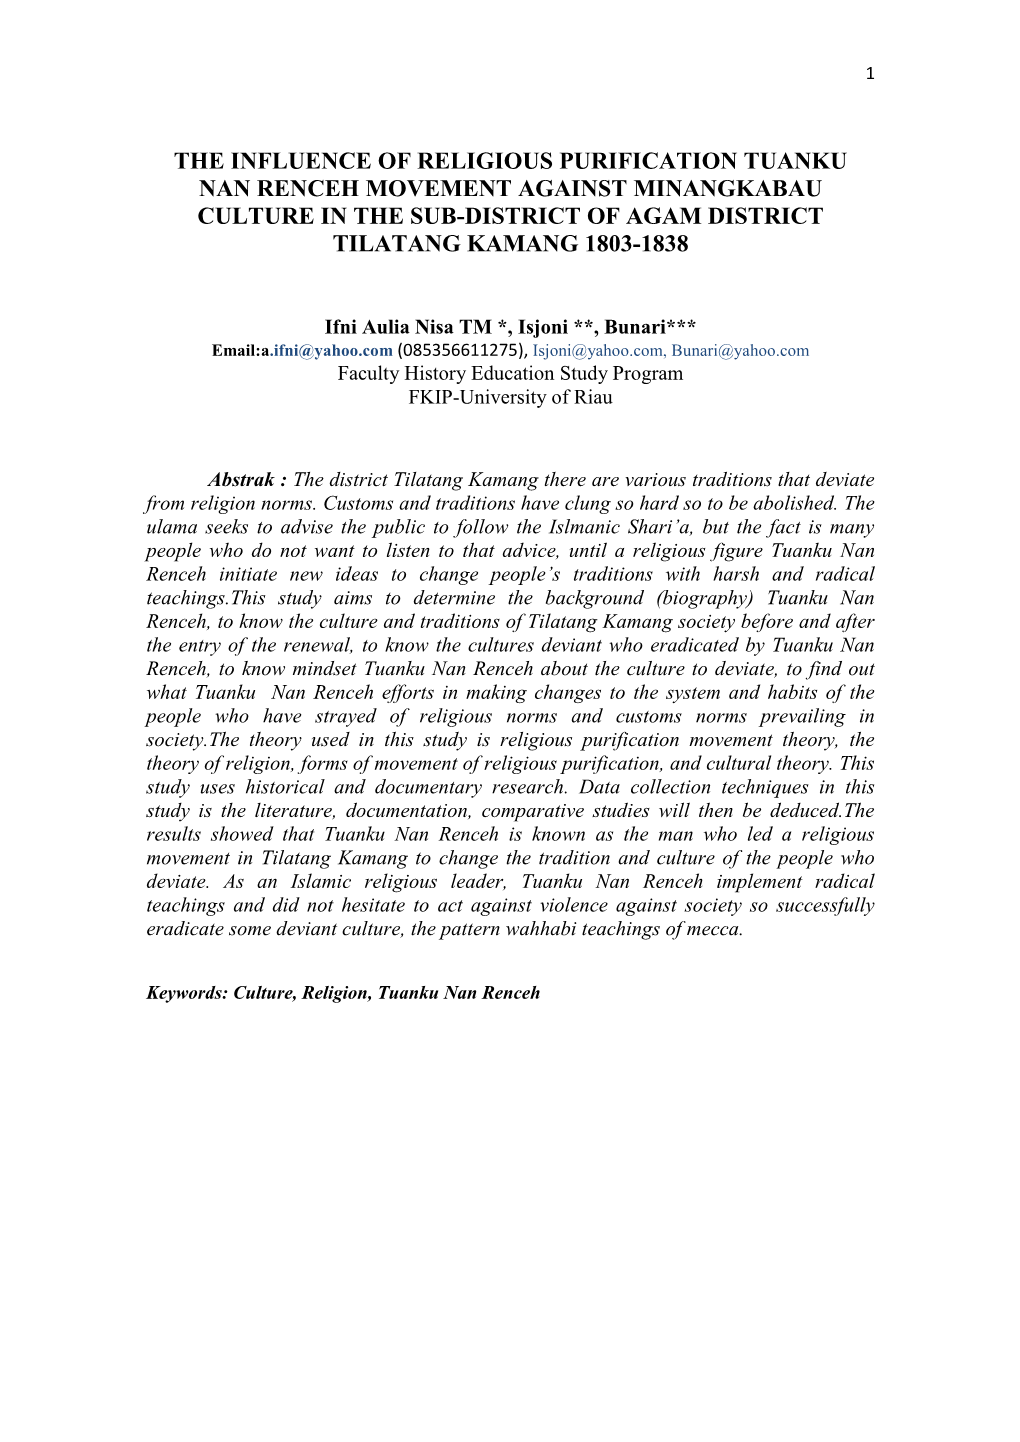 The Influence of Religious Purification Tuanku Nan Renceh Movement Against Minangkabau Culture in the Sub-District of Agam District Tilatang Kamang 1803-1838